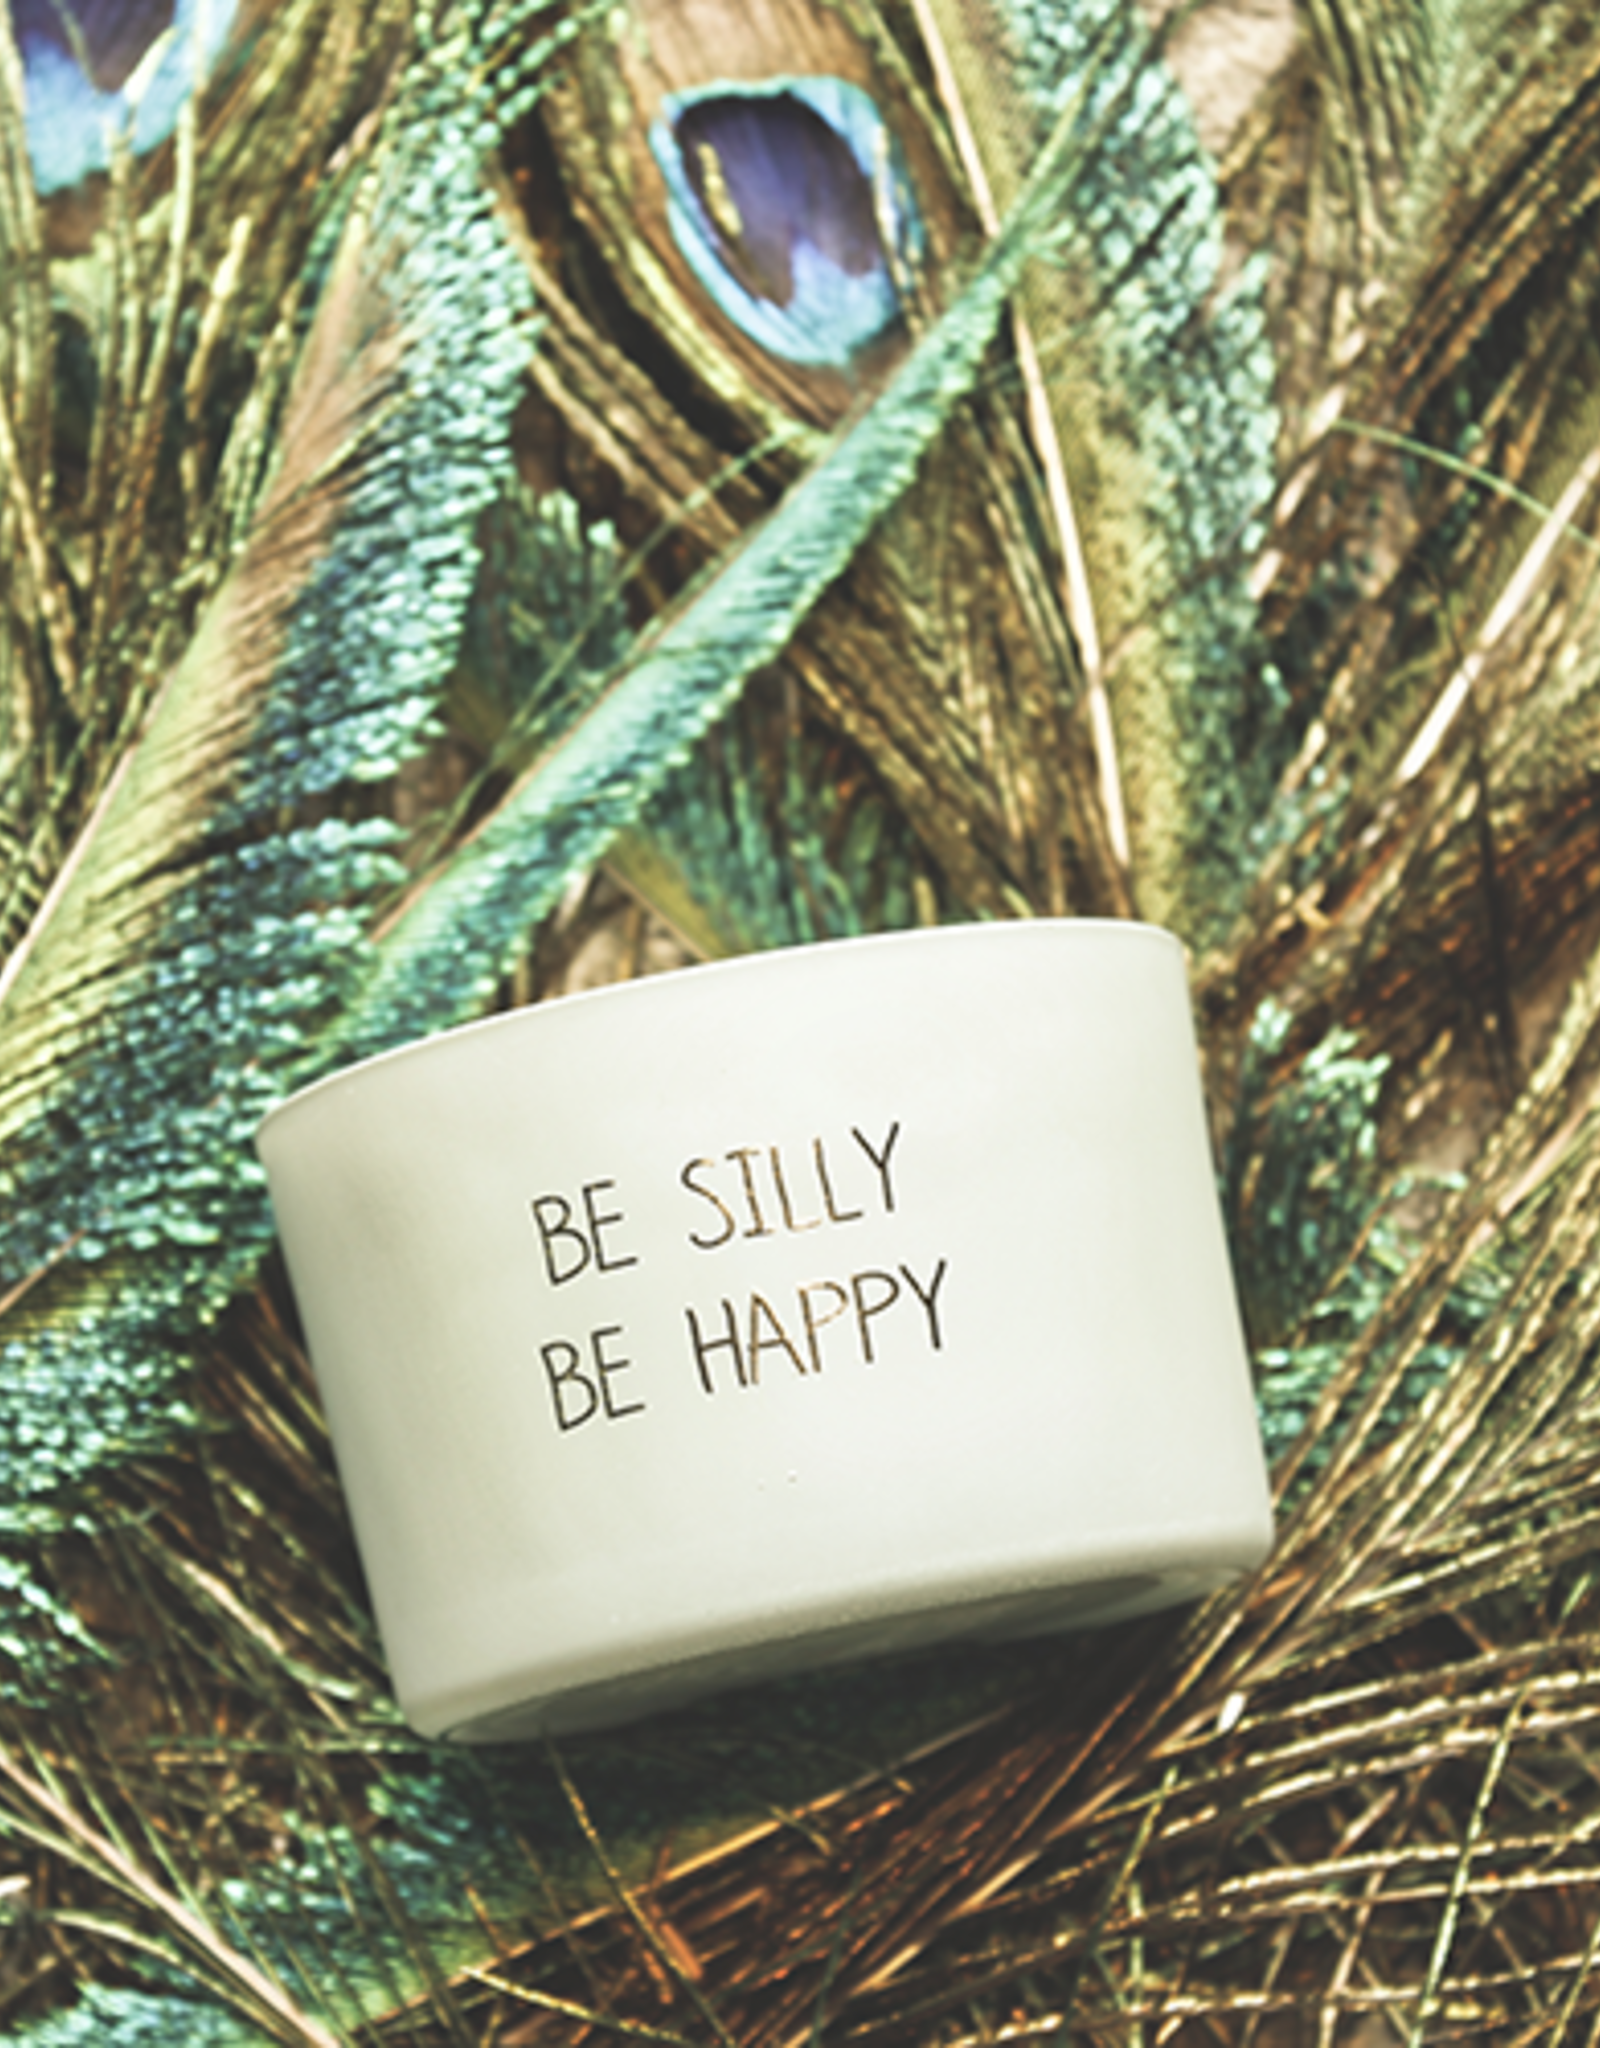 My flame Lifestyle SOJAKAARS - BE SILLY BE HAPPY - GEUR: MINTY BAMBOO